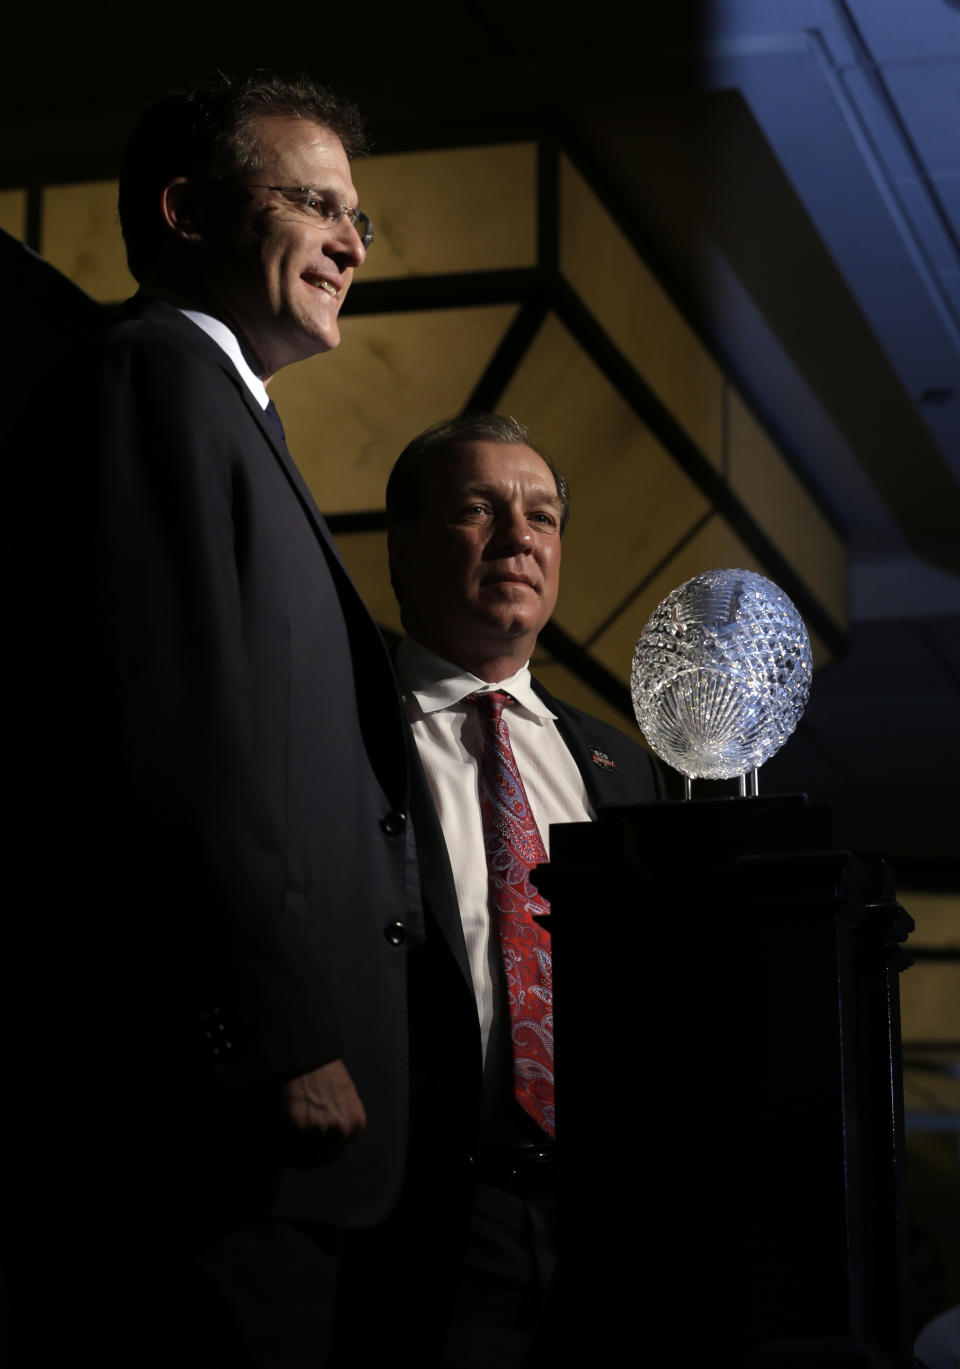 Auburn head coach Gus Malzahn, left, and Florida State head coach Jimbo Fisher pose with The Coaches' Trophy during a news conference for the NCAA BCS National Championship college football game Sunday, Jan. 5, 2014, in Newport Beach, Calif. Florida State plays Auburn on Monday, Jan. 6, 2014. (AP Photo/Morry Gash)